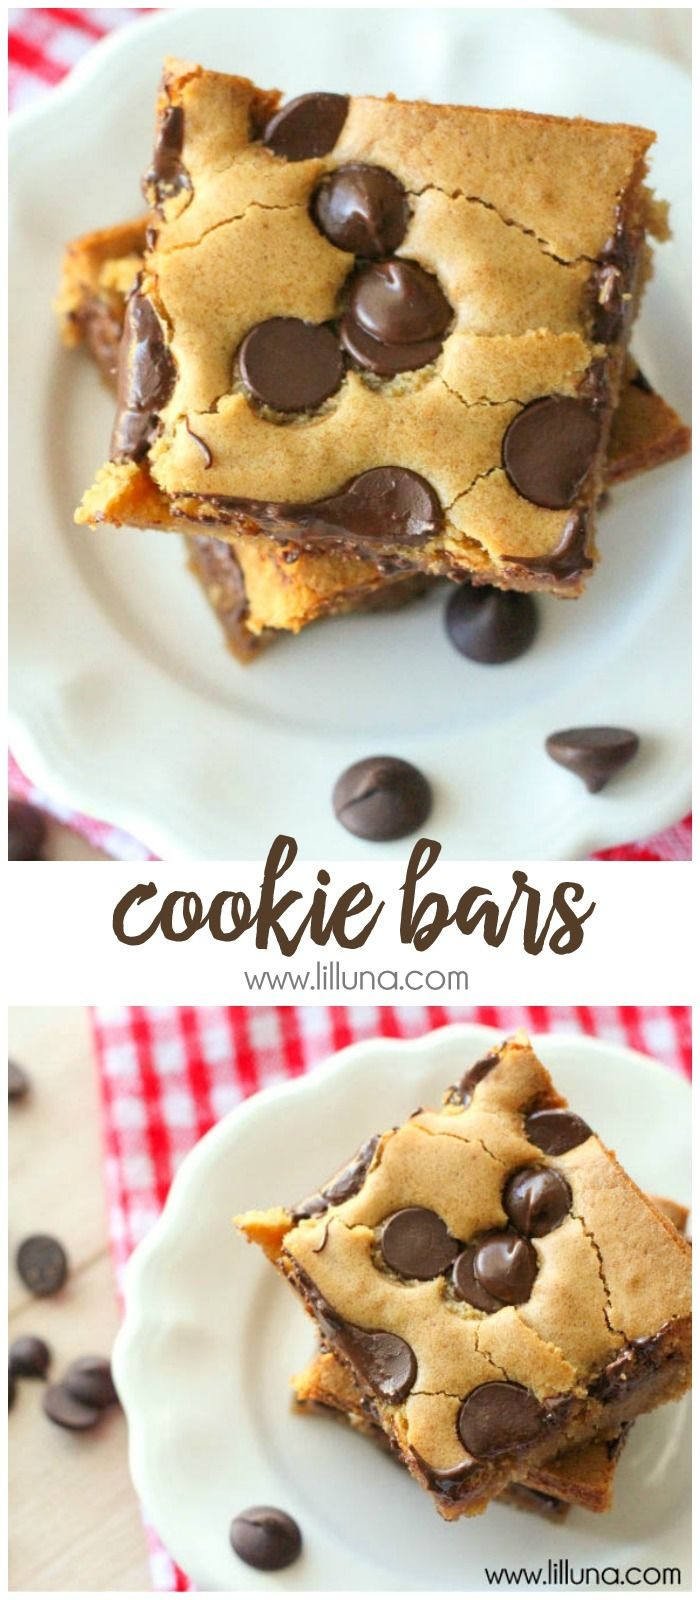 Easy Desserts With Chocolate Chips
 Best 25 Easy desserts ideas on Pinterest